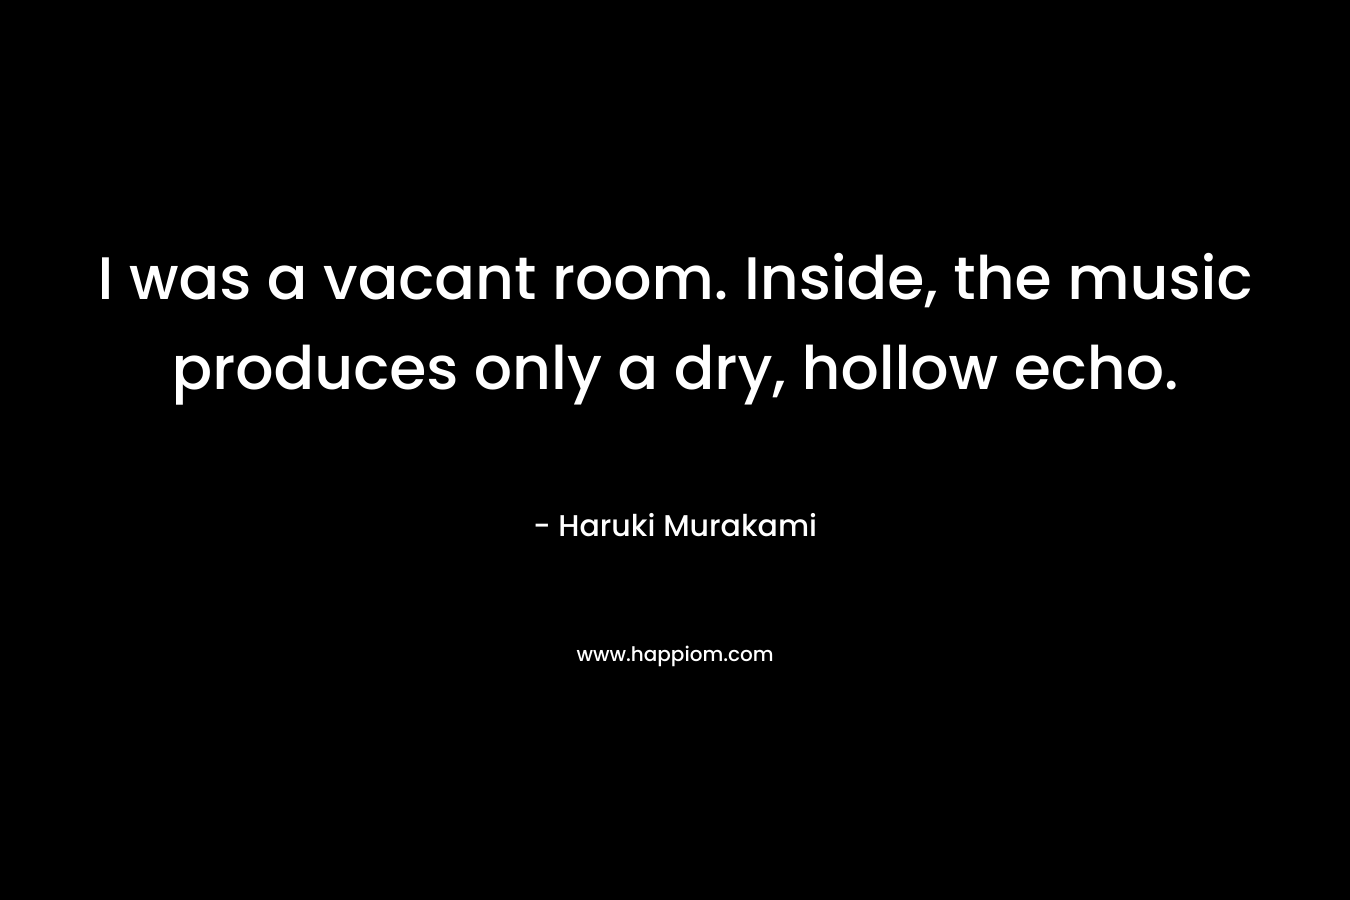 I was a vacant room. Inside, the music produces only a dry, hollow echo. – Haruki Murakami